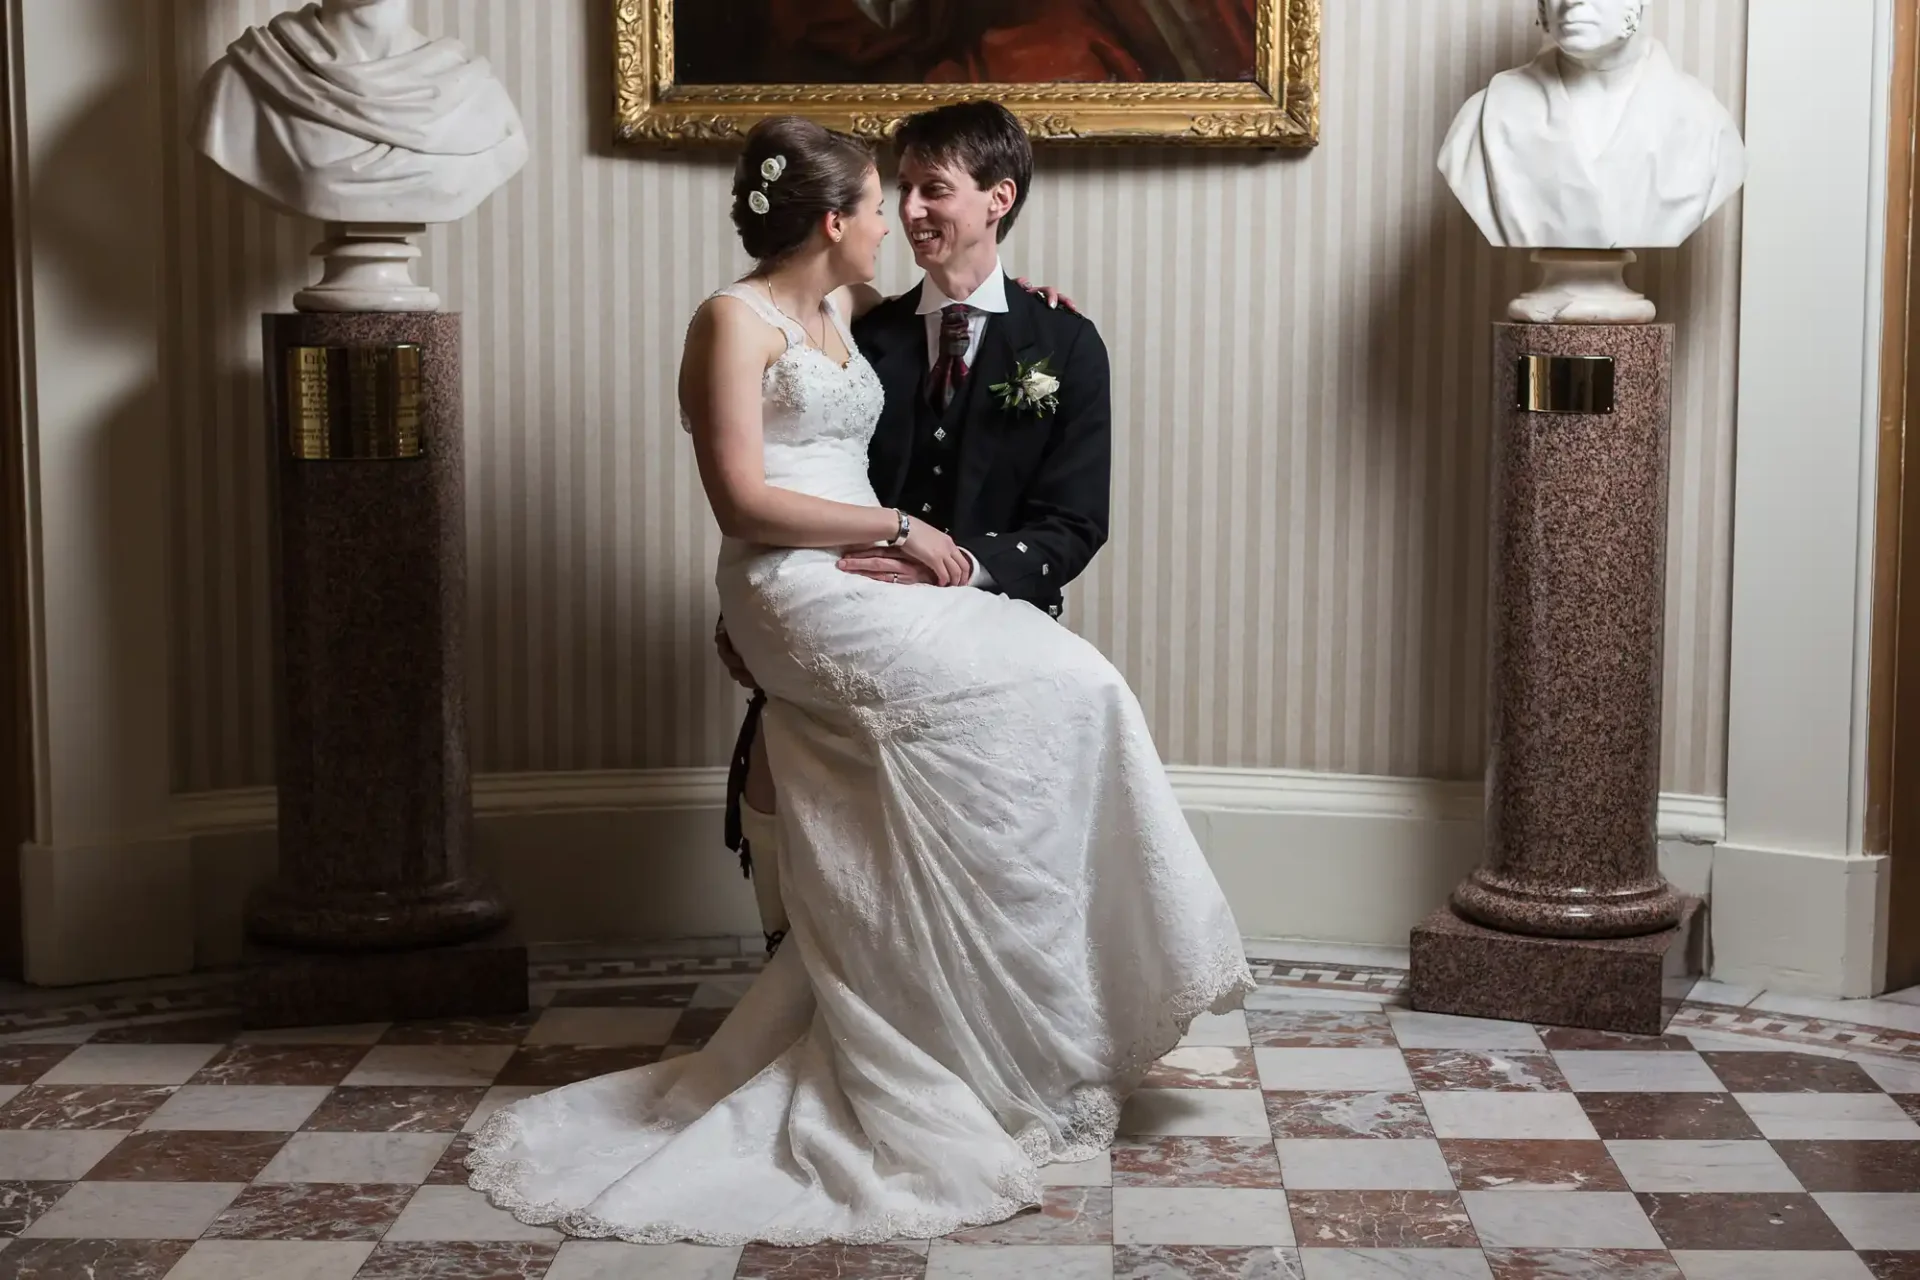 A bride in a white gown and a groom in a black suit seated closely together, smiling, in a classic room with marble columns and bust sculptures.